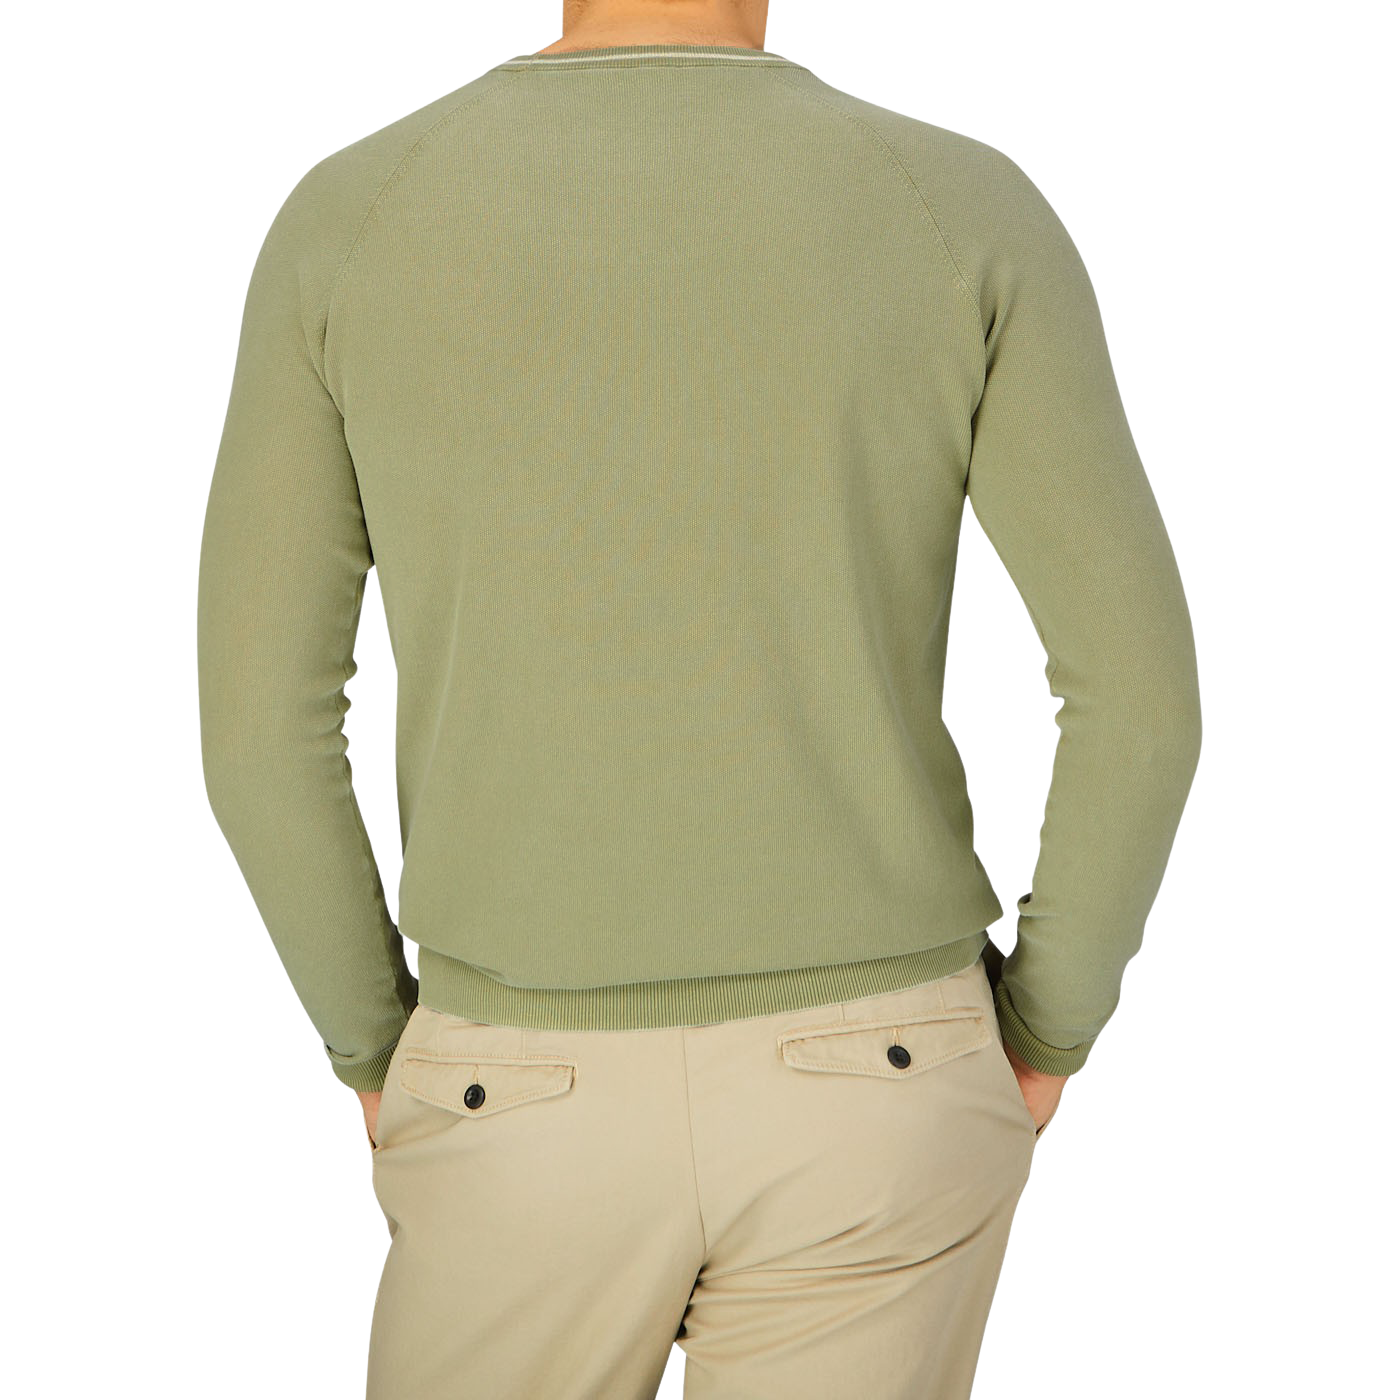 The back view of a man wearing an Aspesi Sage Green Cotton Piquet Crew Neck Sweater and khaki pants.